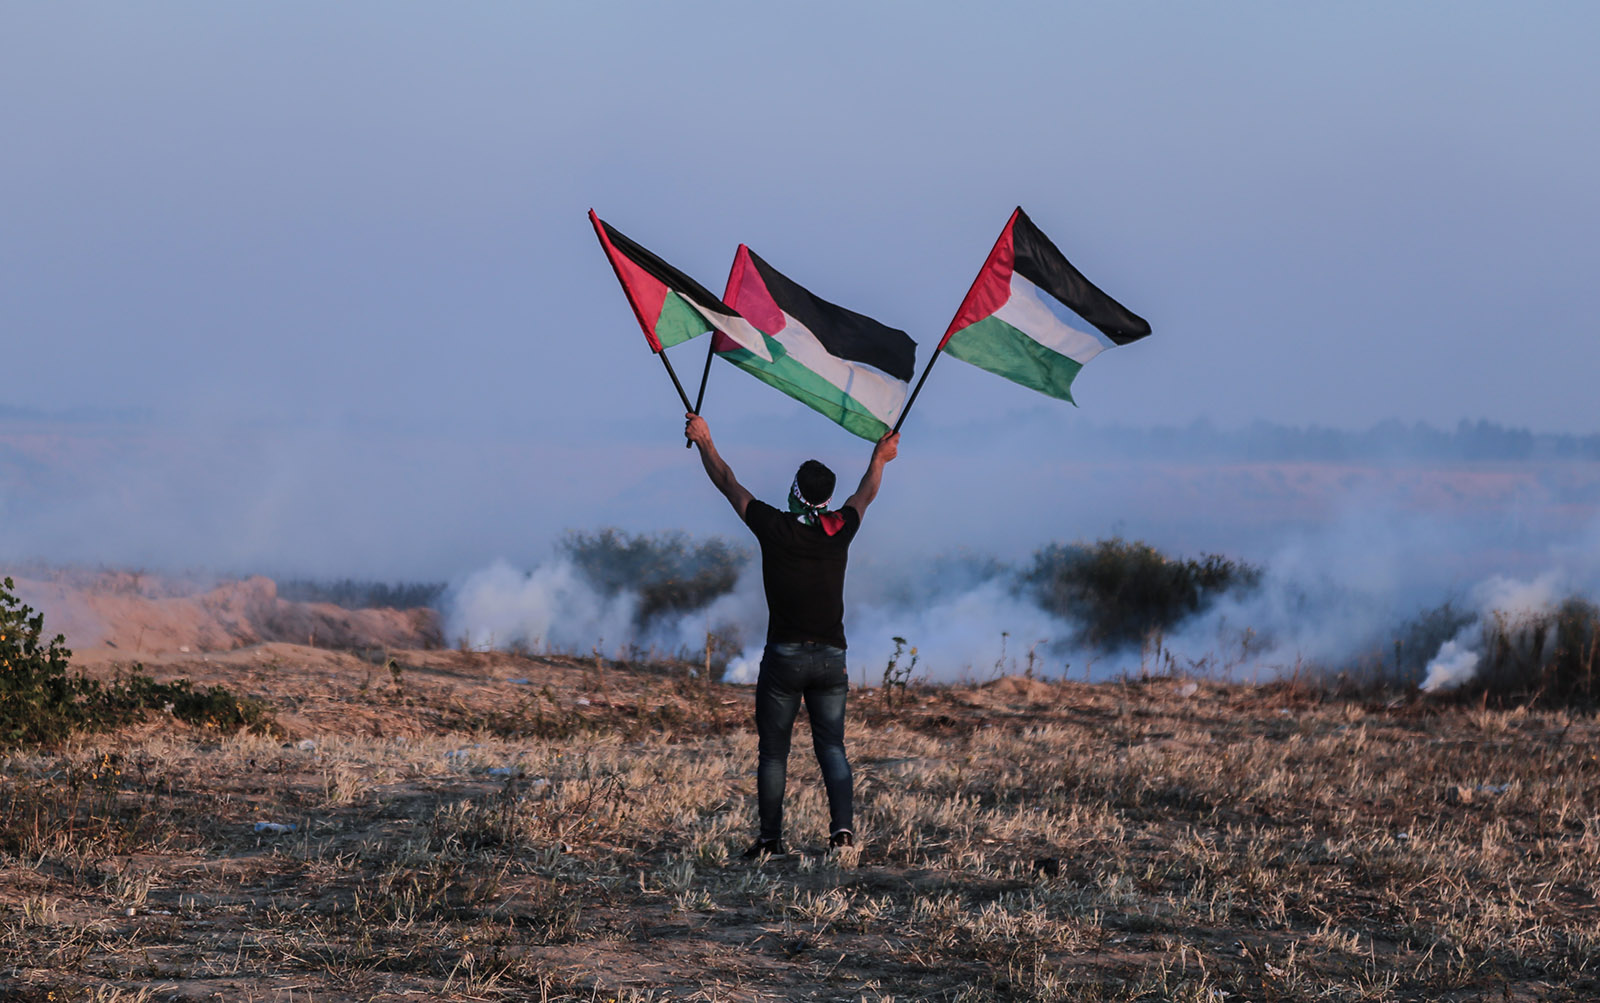 A Palestinian waving flags as tear gas disperses from canisters fired by Israeli troops during a protest near Khan Younis, Gaza Strip, March 22, 2019